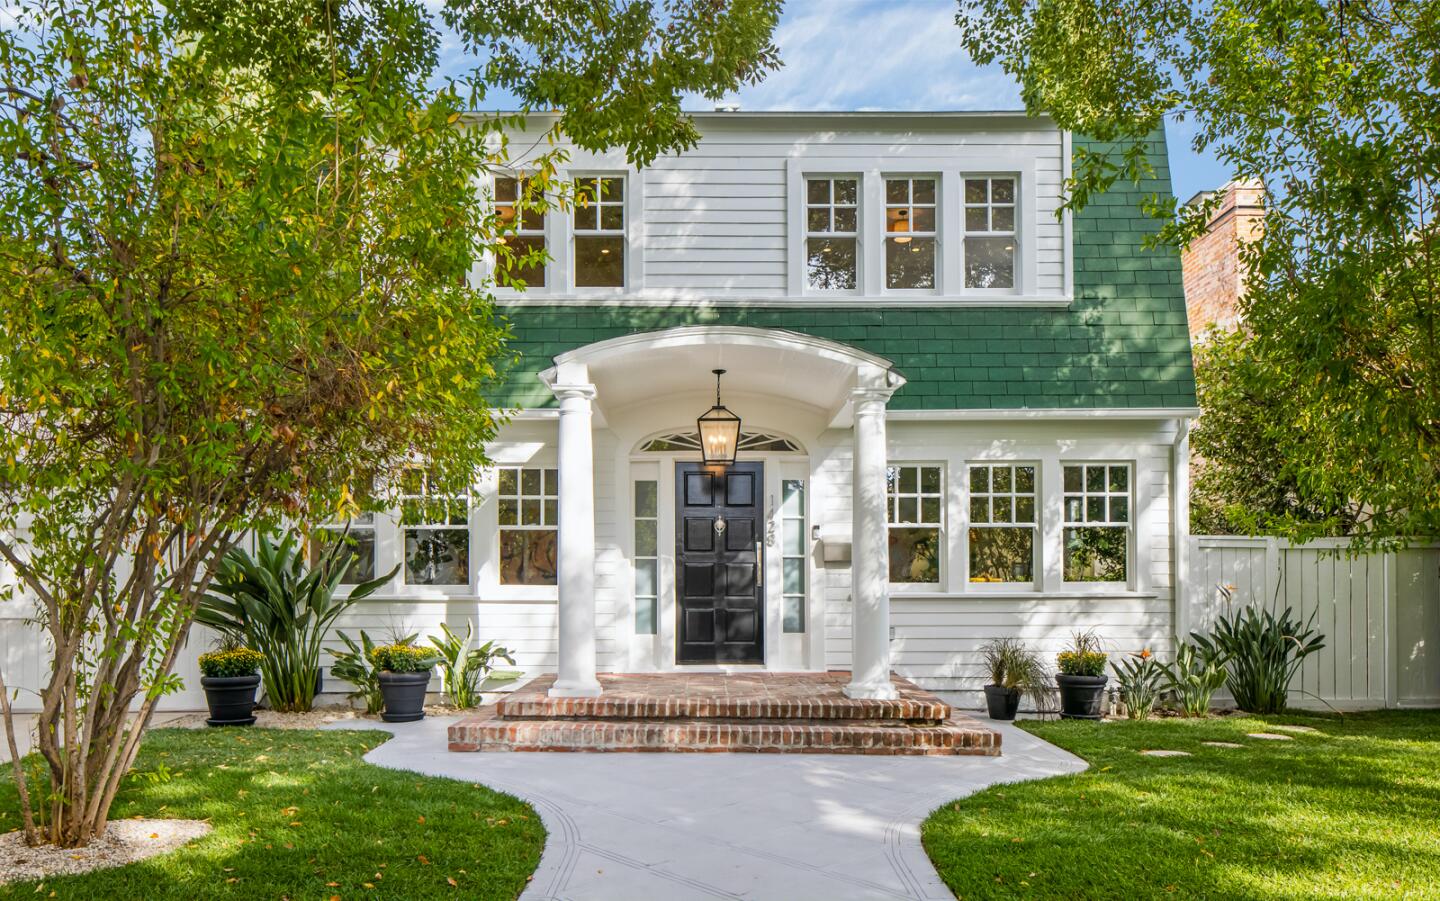 Built in 1919, the Dutch Colonial-style home still features the iconic green-shingled facade that appeared in the 1984 film.